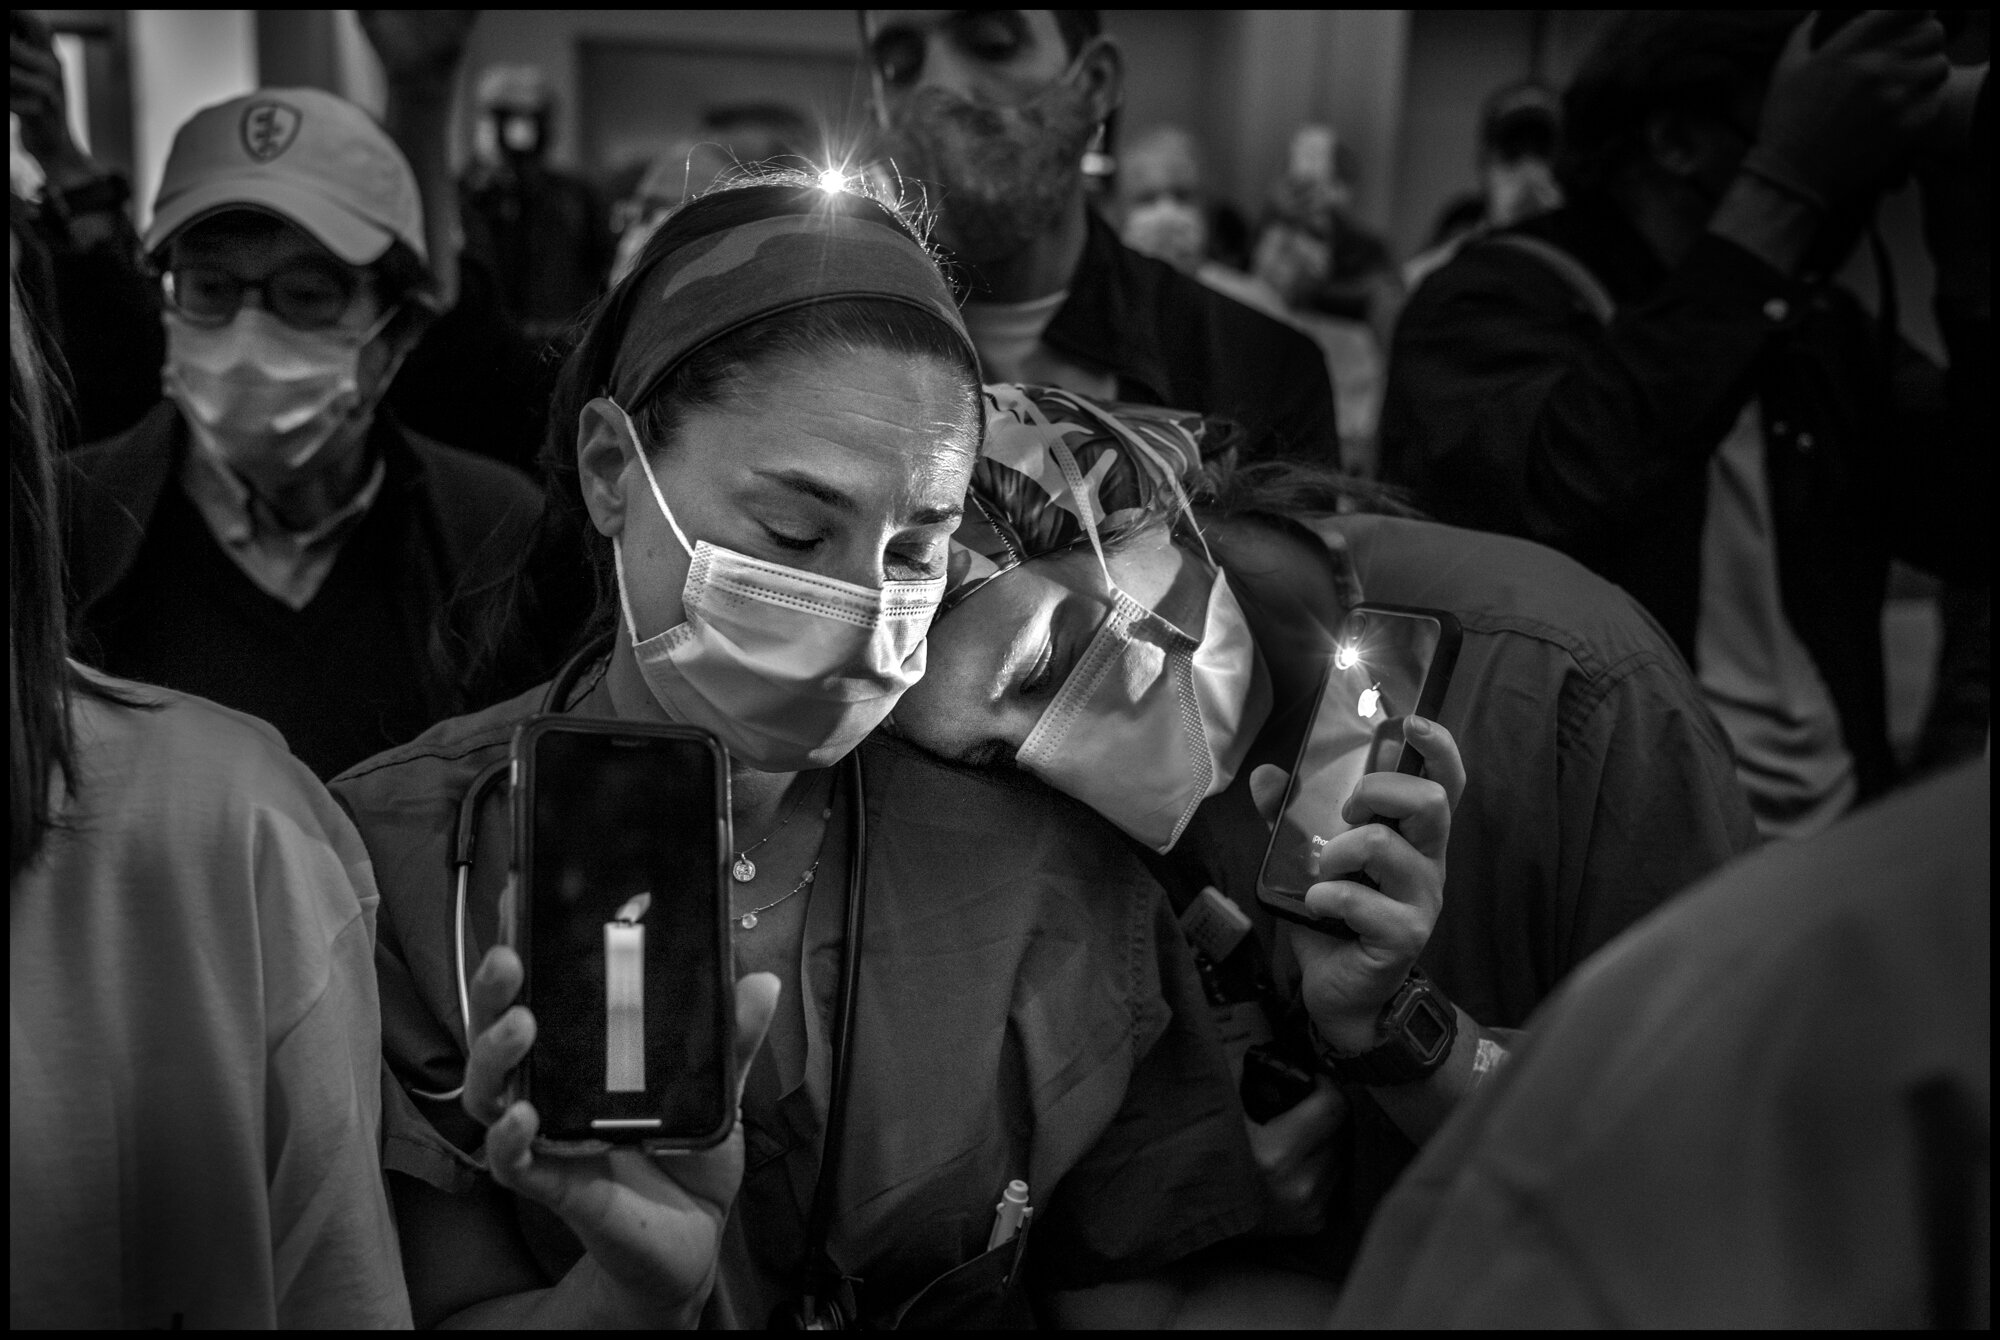  Frontline workers from Lenox Hill Hospital, New York, hold vigil to honor all victims of COVID-19.  May 20, 2020. © Peter Turnley.   ID# 51-004 